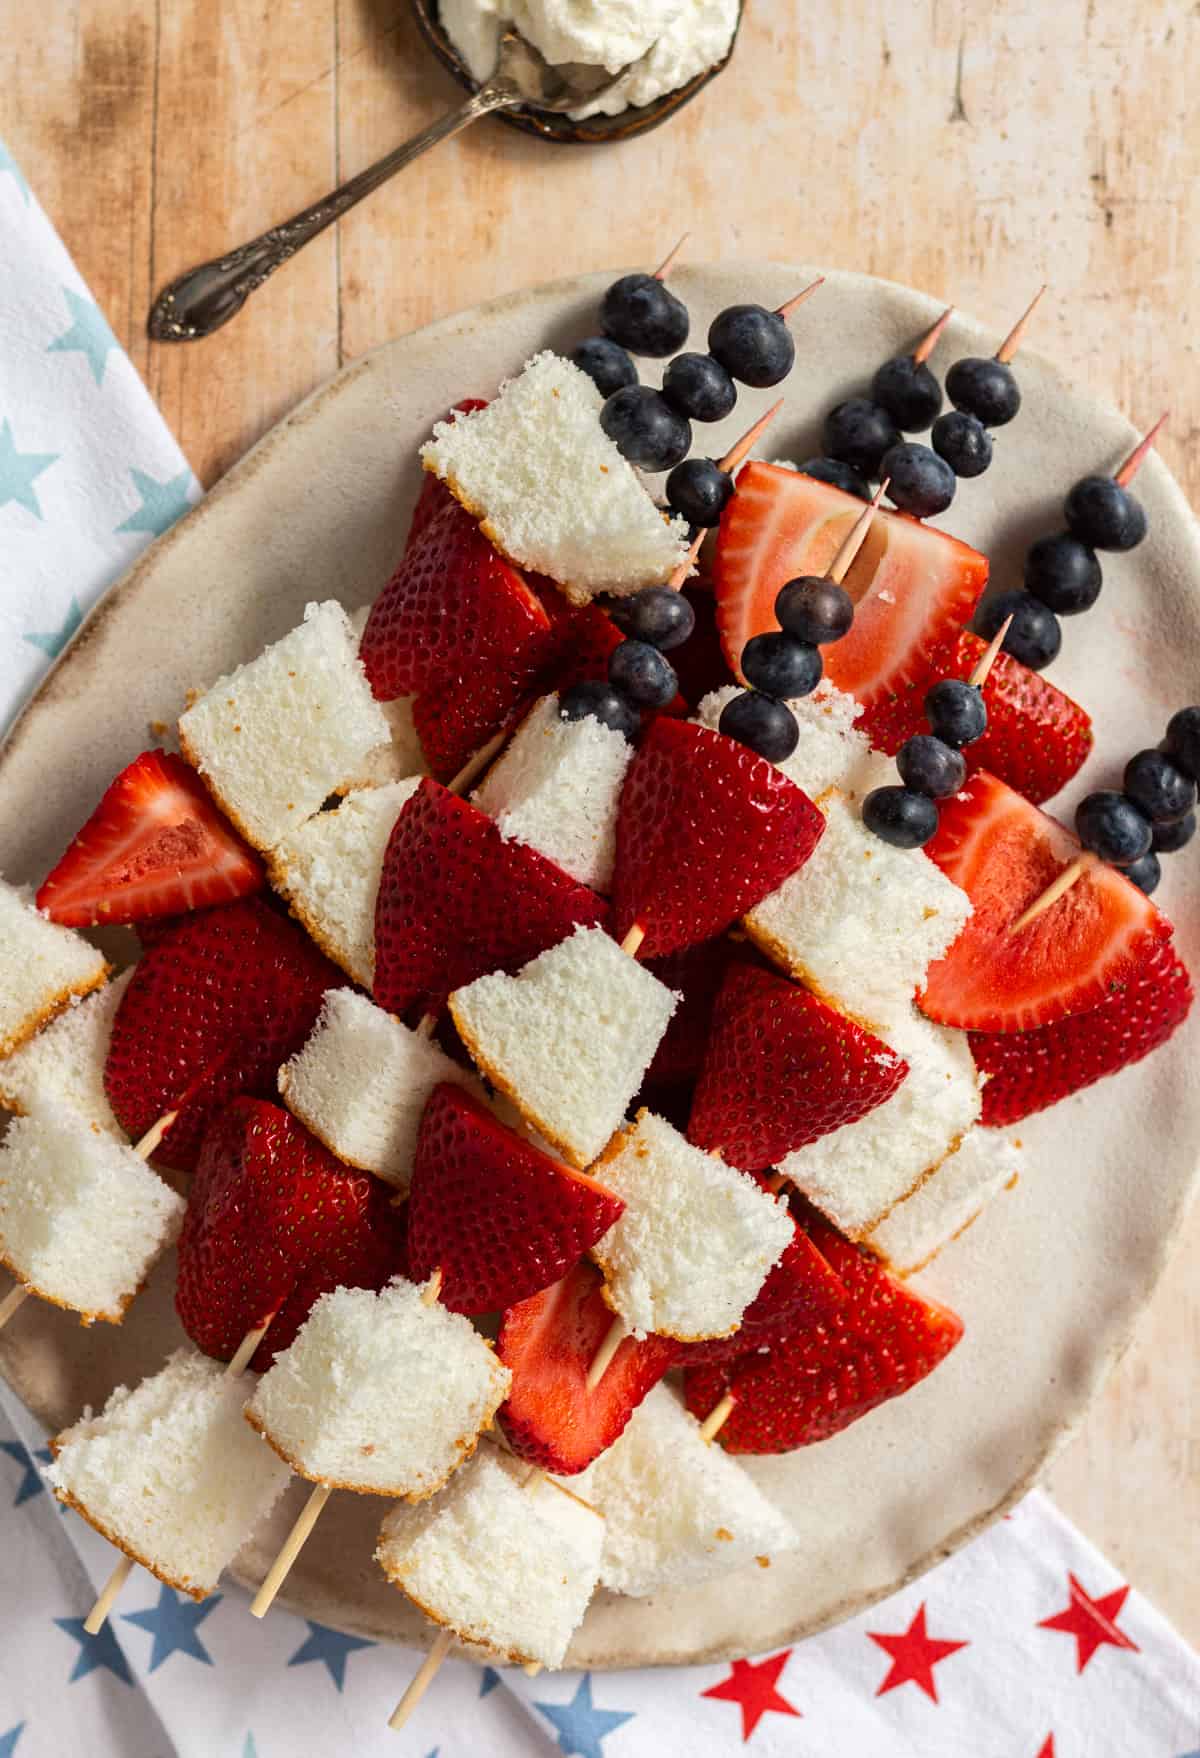 Sliced strawberries, angel food cake, and blueberries on a skewers. They're on a plate sitting on top of a red, white, and blue starred napkin.